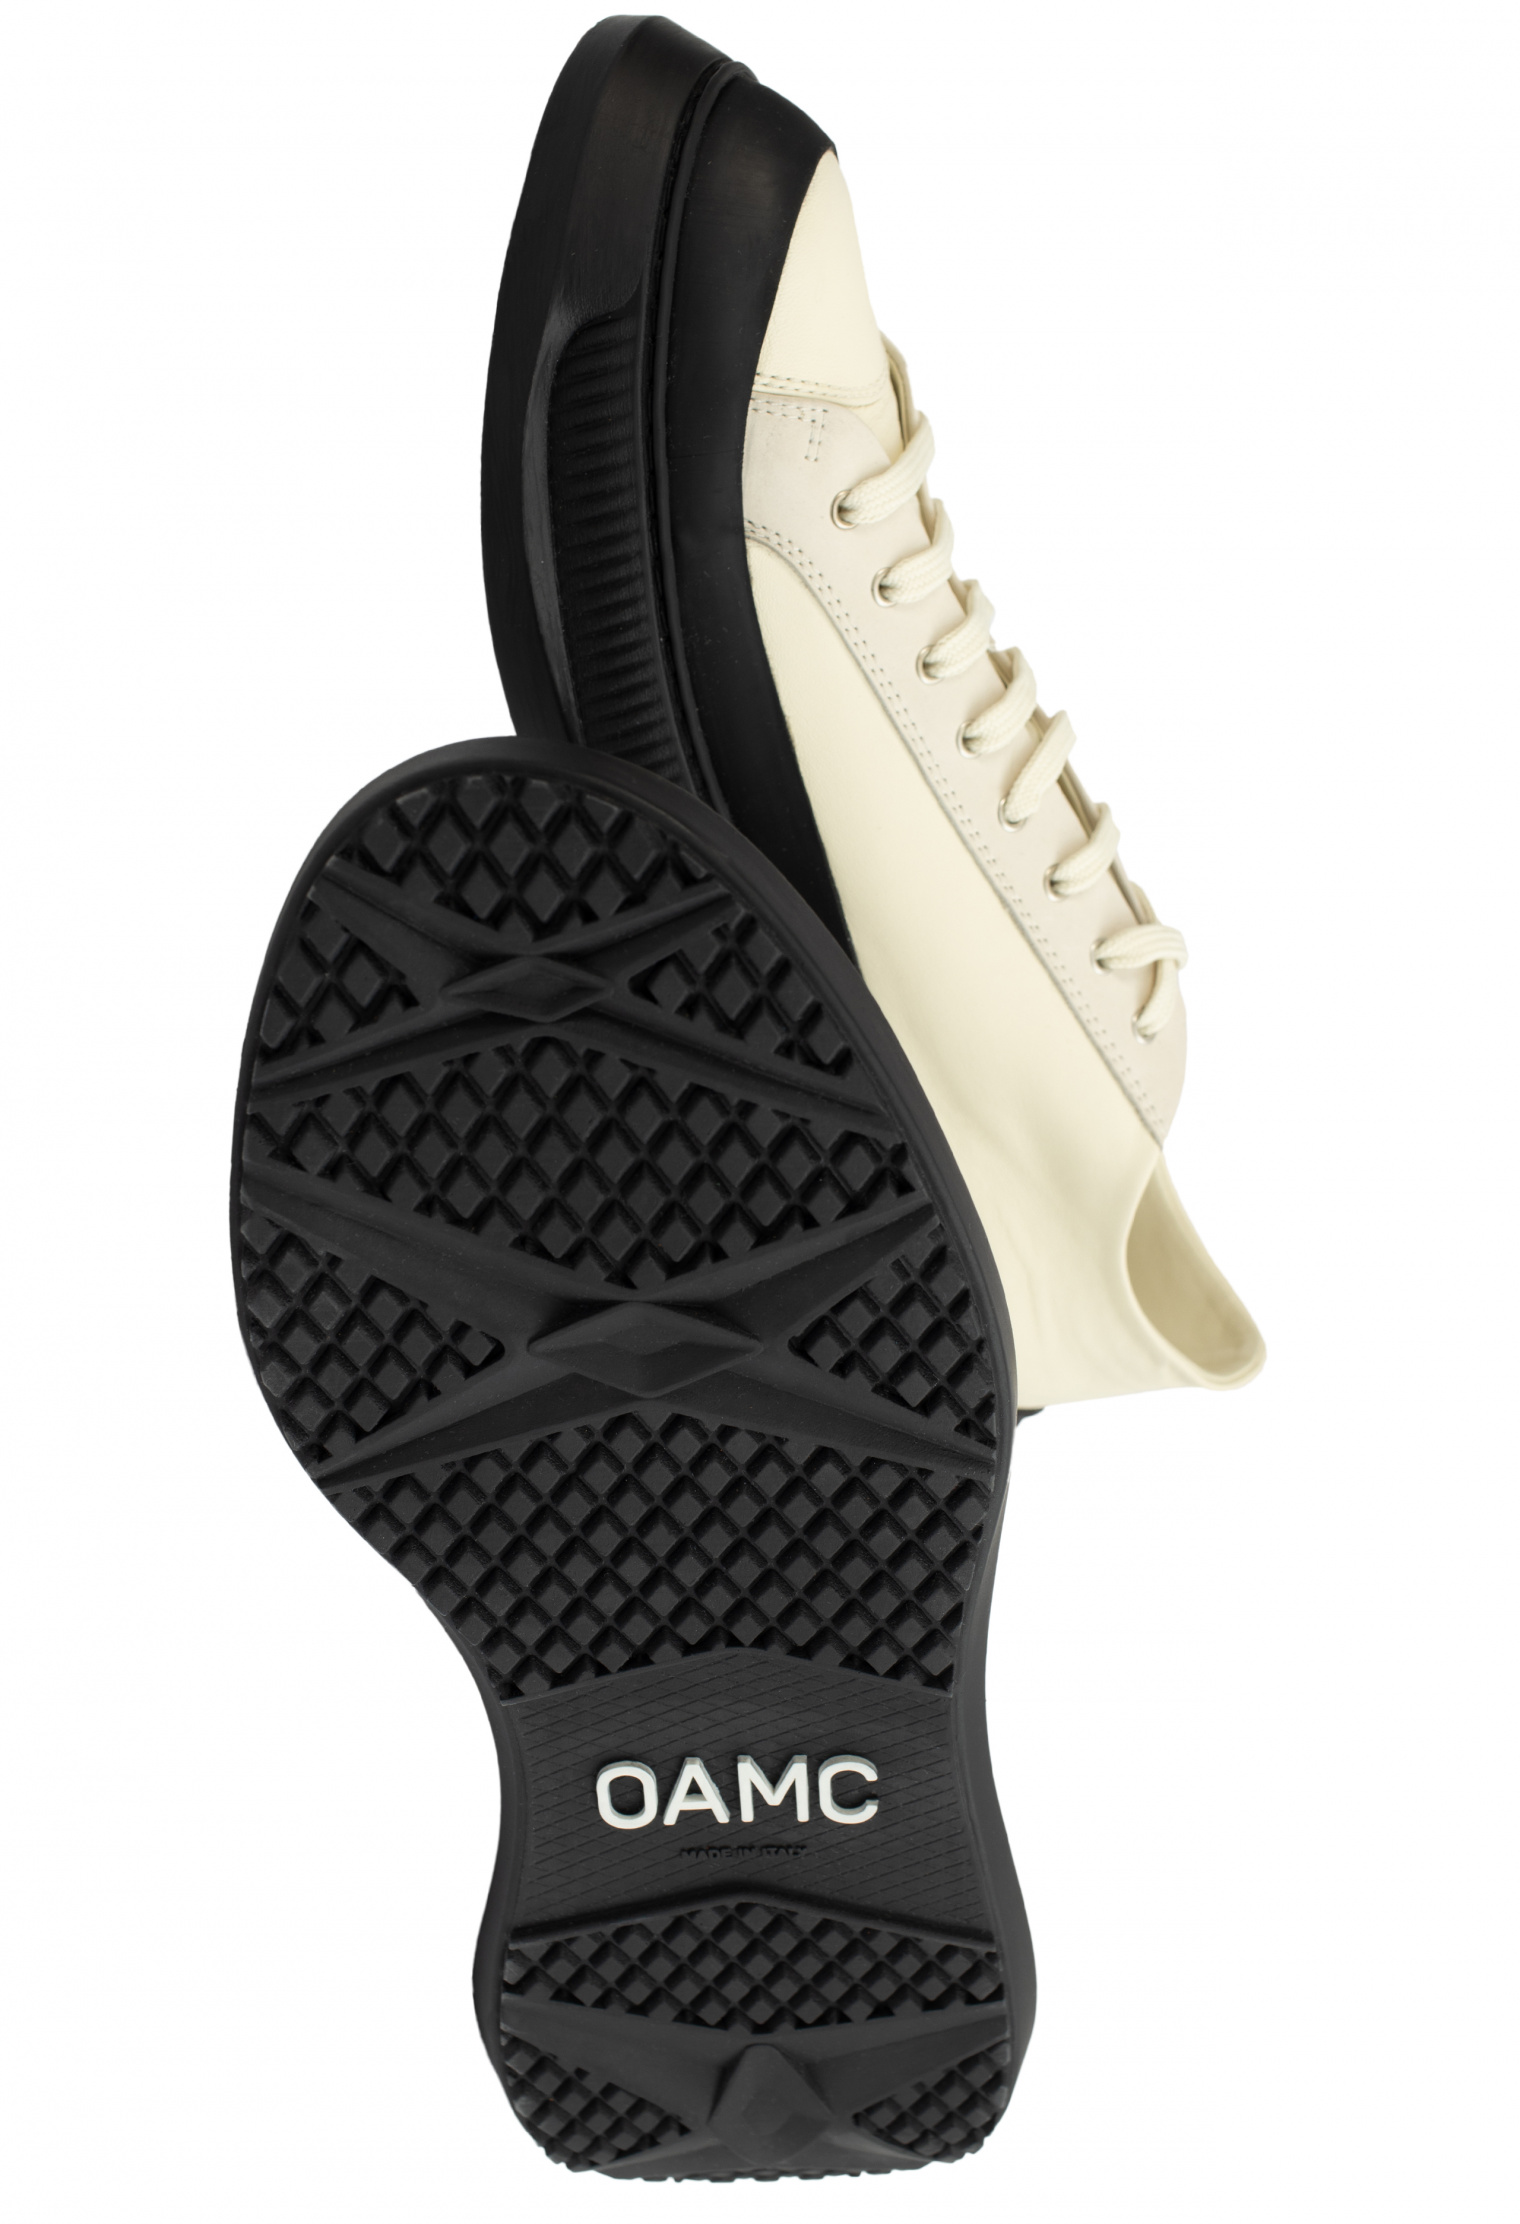 OAMC RUGGED SOLE white SNEAKERS